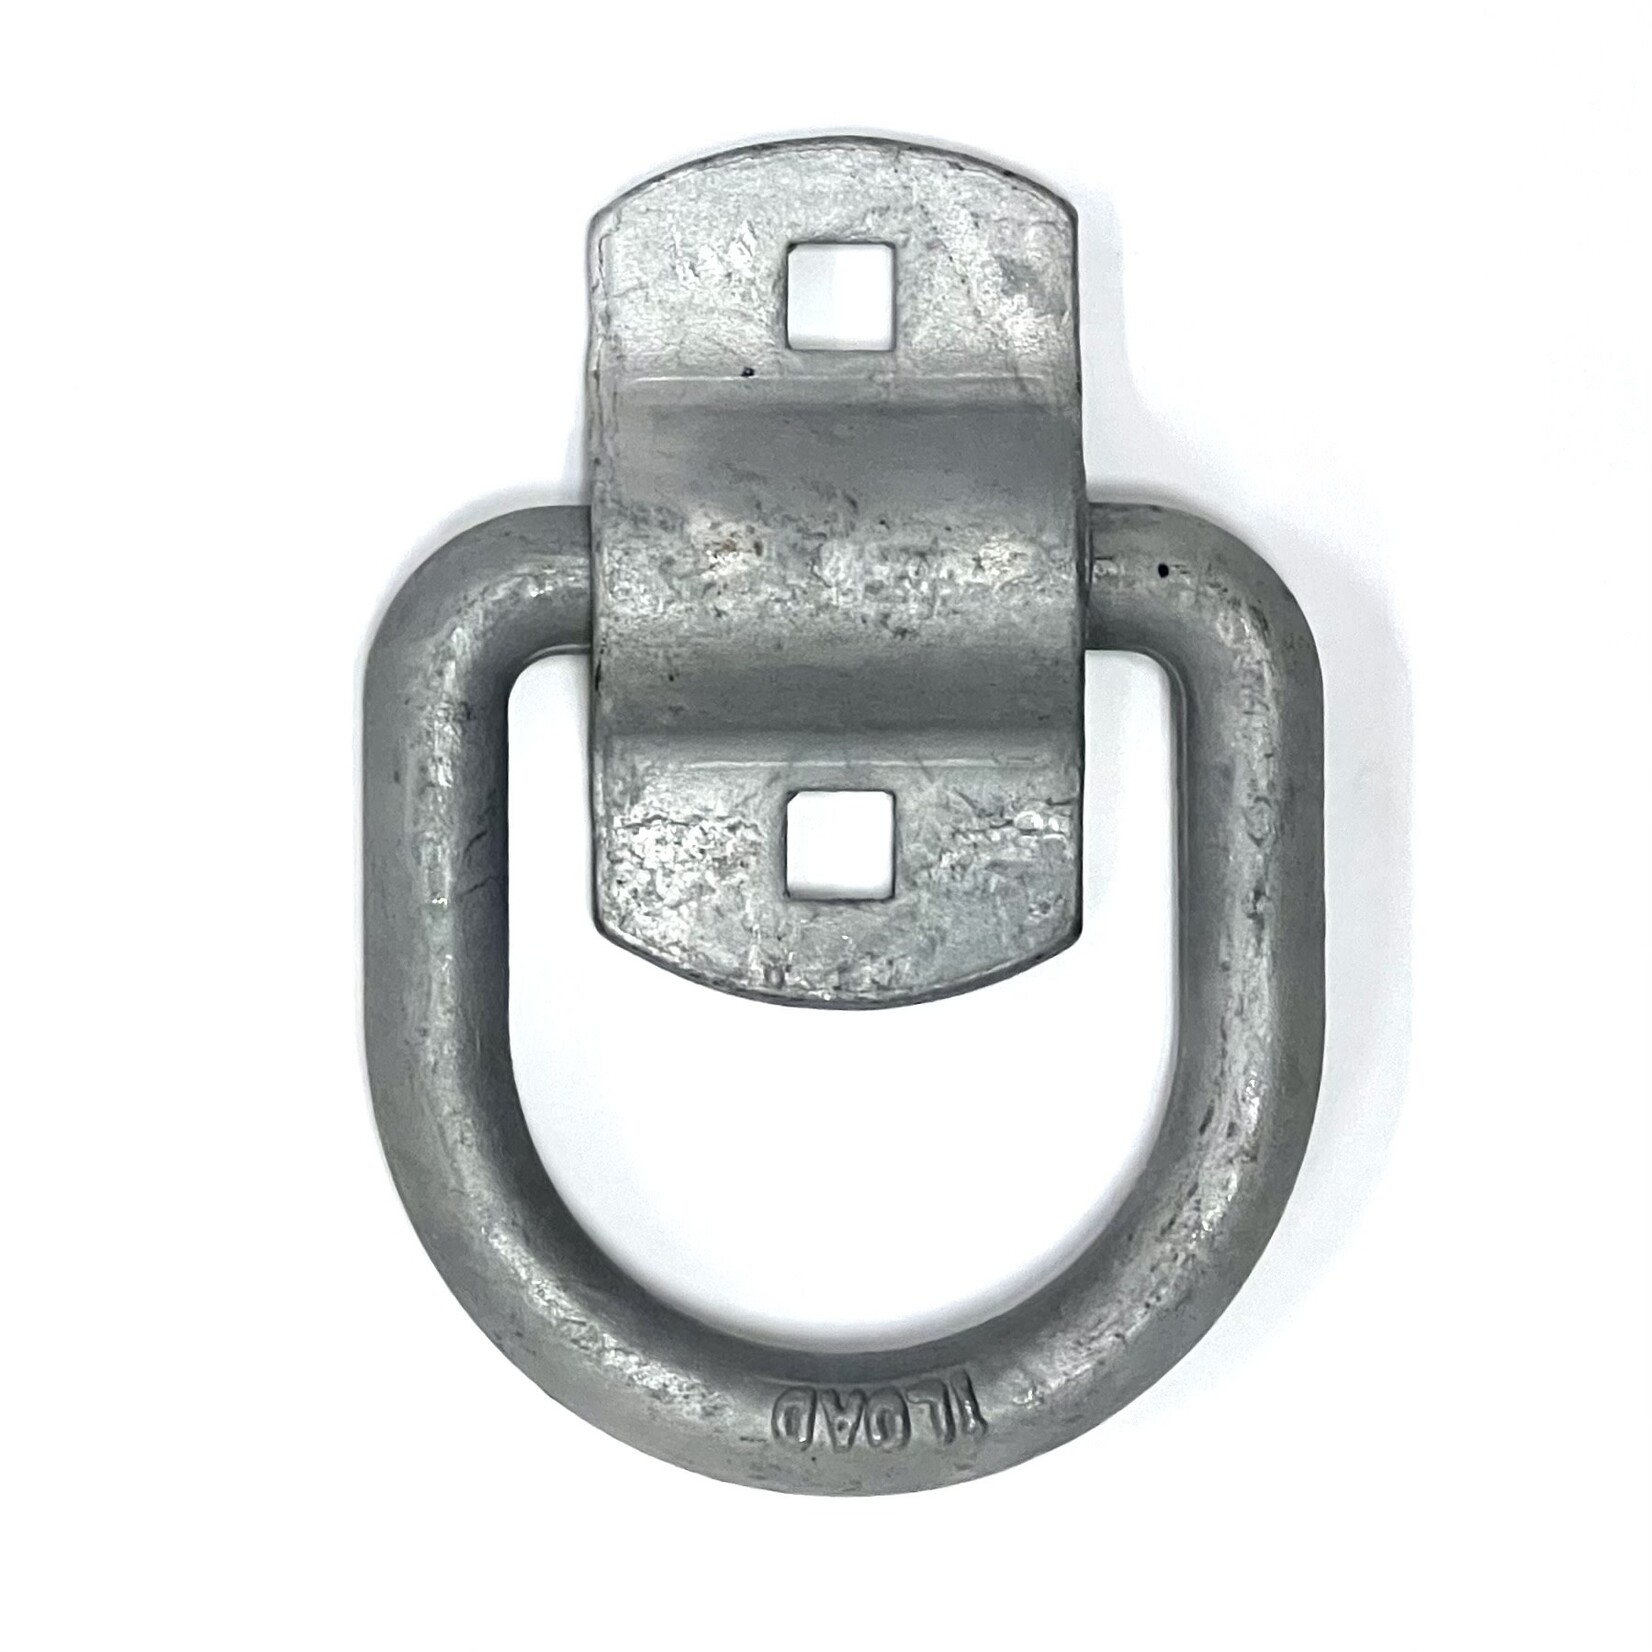 Pacific Cargo 1/2" Forged D-Ring w/ Bolt-On Clip, Galvanized